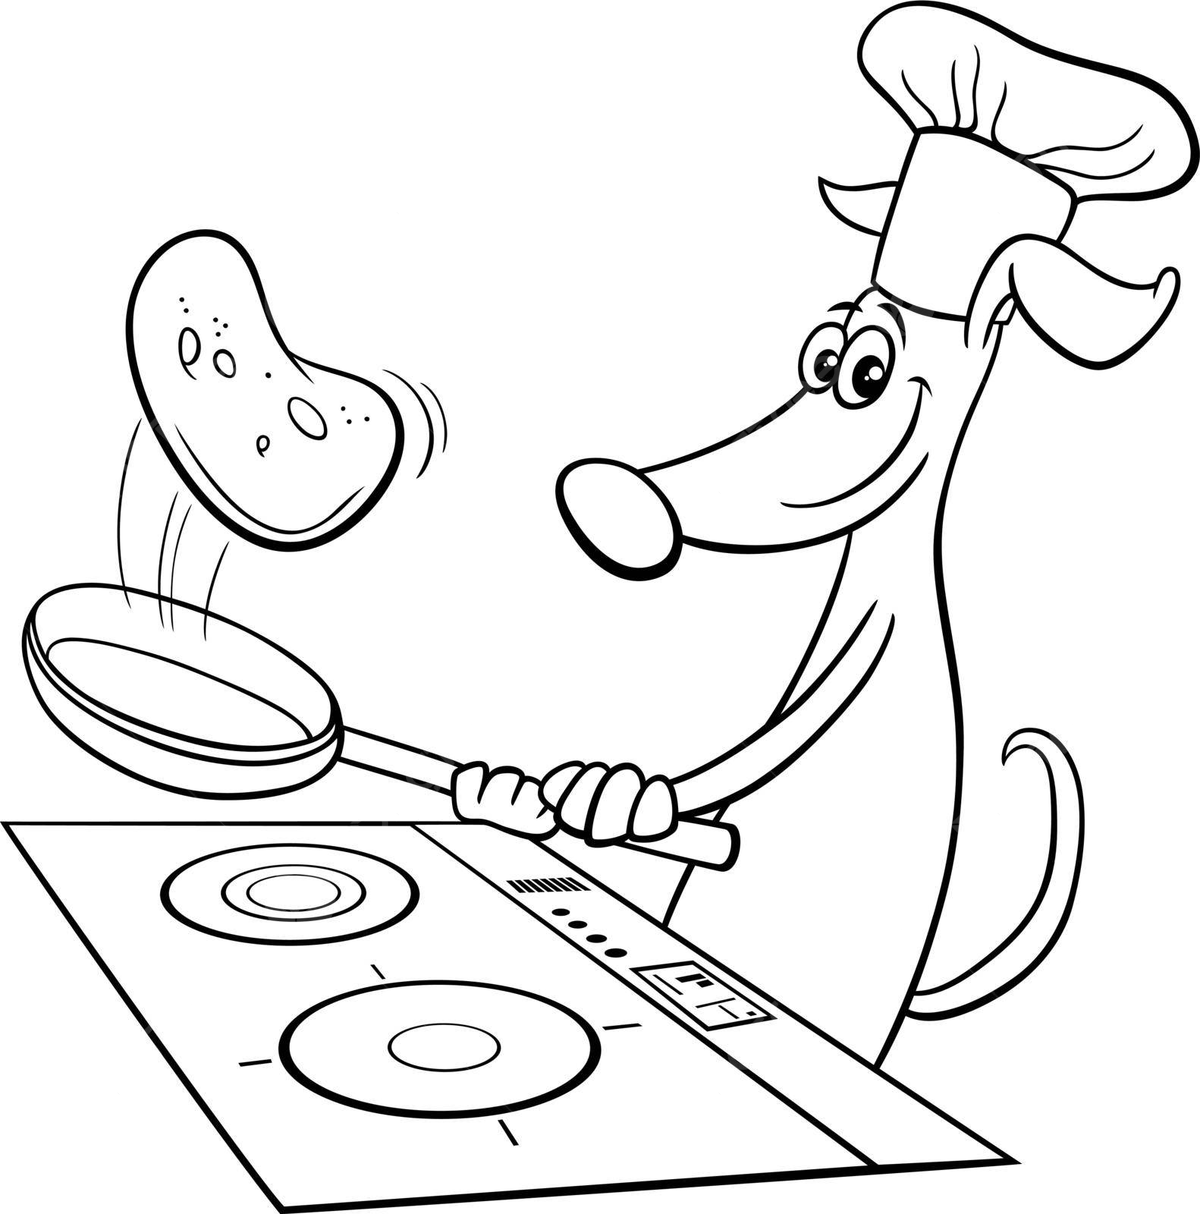 Cartoon dog character frying pancakes coloring page frying cooker drawing vector frying cooker drawing png and vector with transparent background for free download